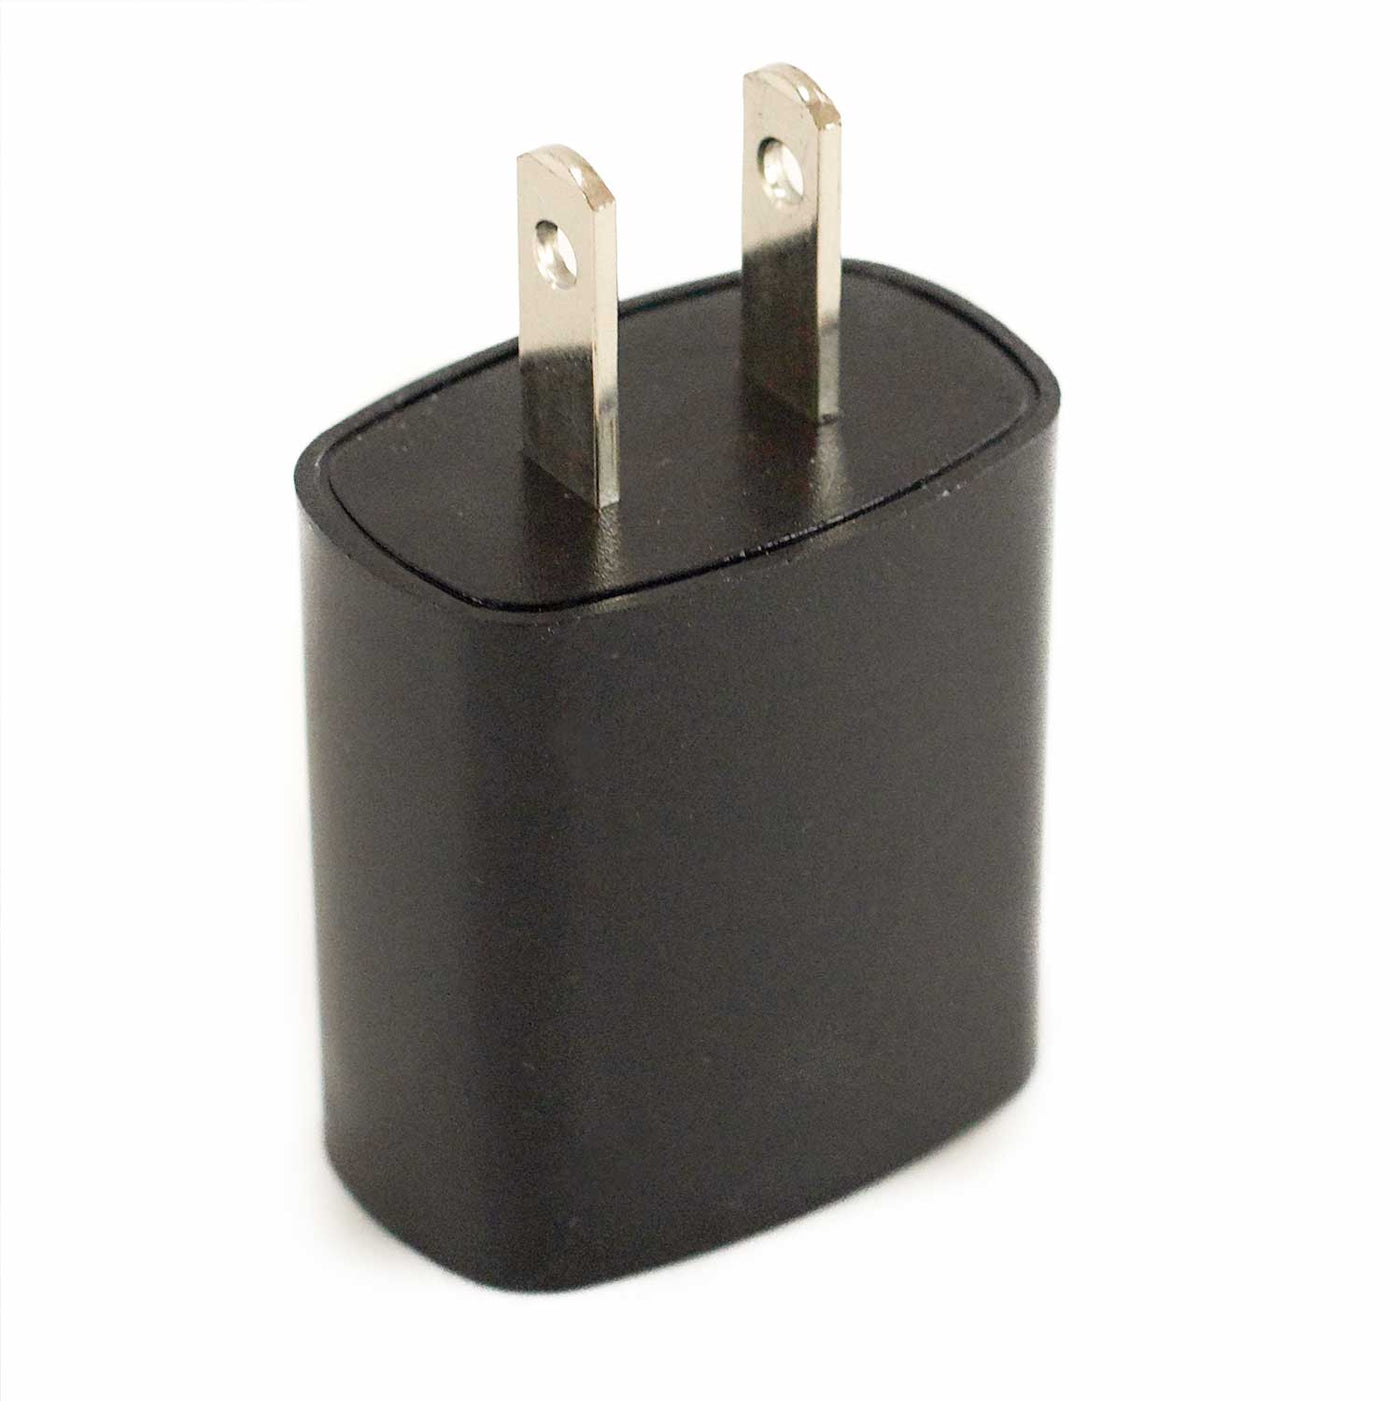 USB wall adapter. These chargers are refurbished and may come in various packaging.